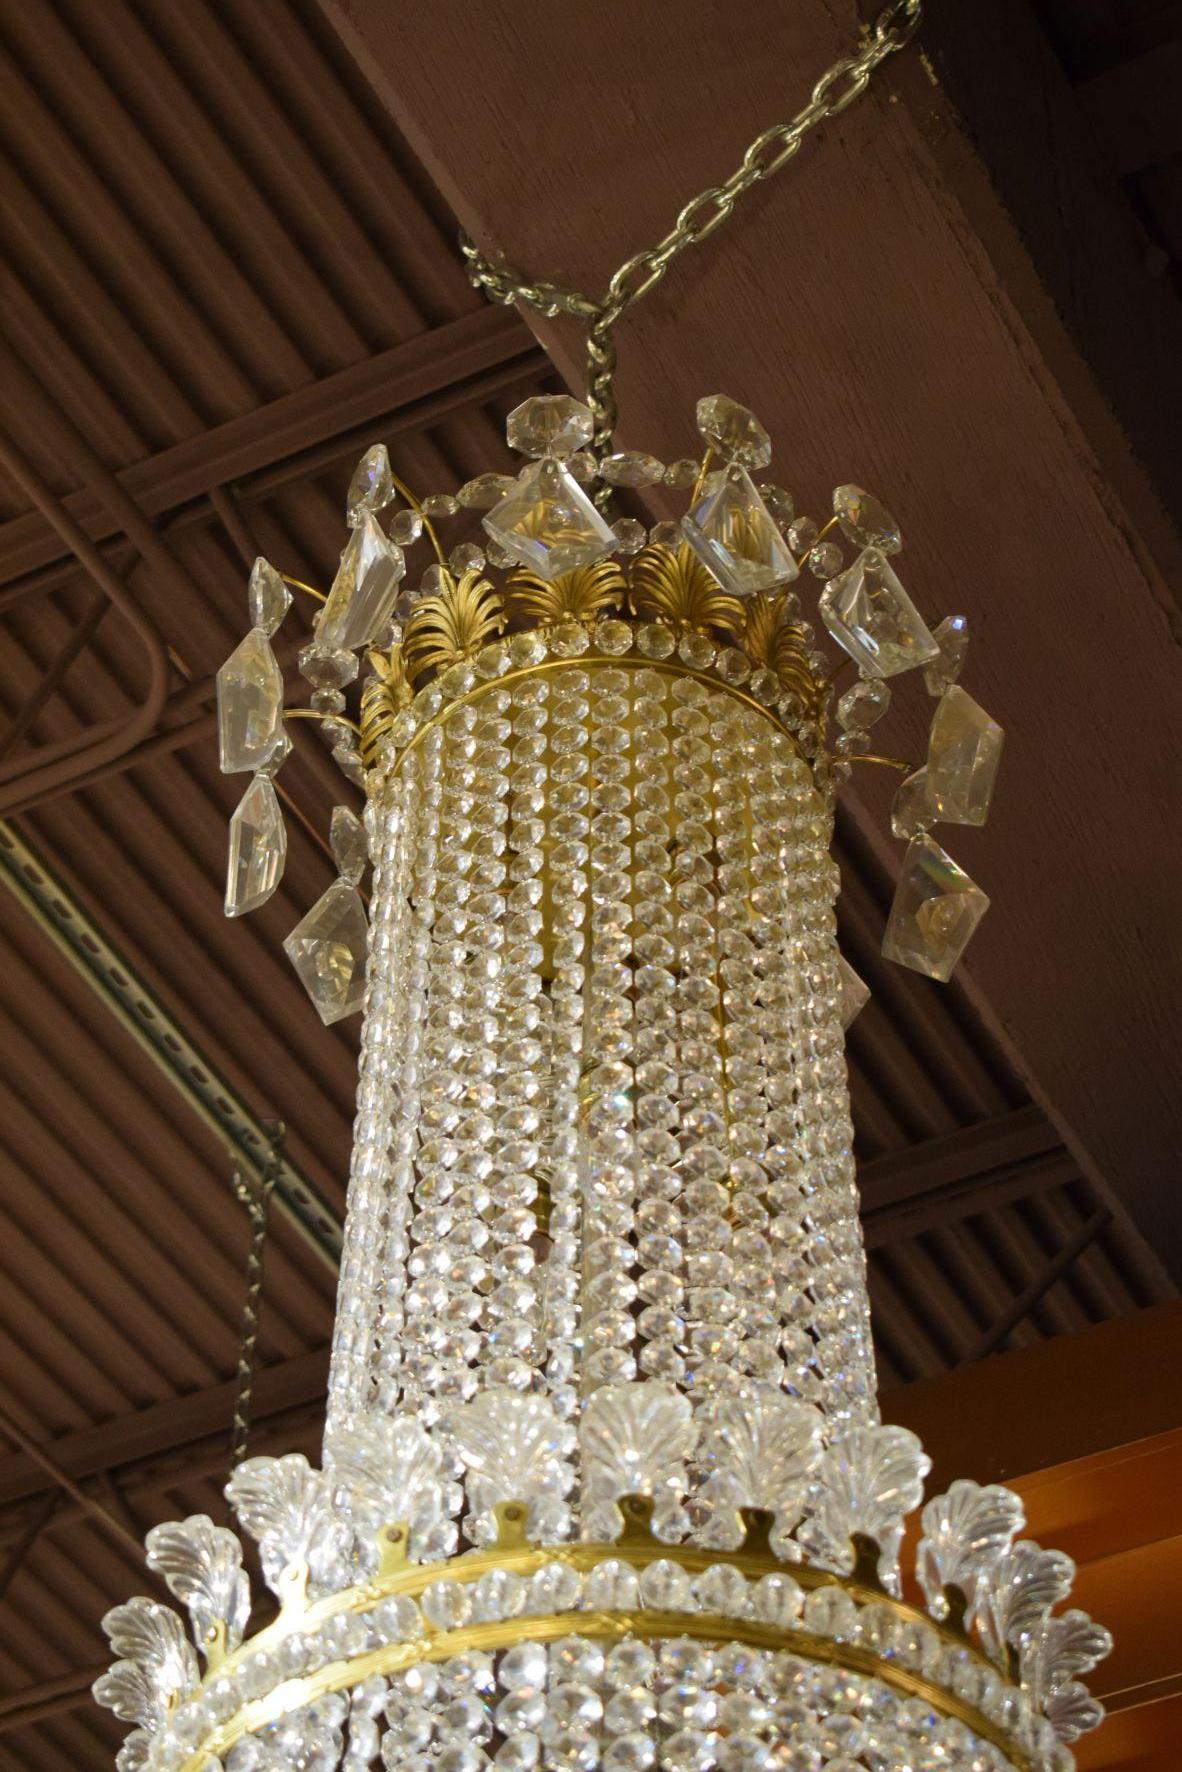 A superb and very fine Regency style English chandelier, gilt bronze and cut crystal. England, circa 1880. 33 lights (24 perimetral, 9 interior)
Dimensions: Height 85